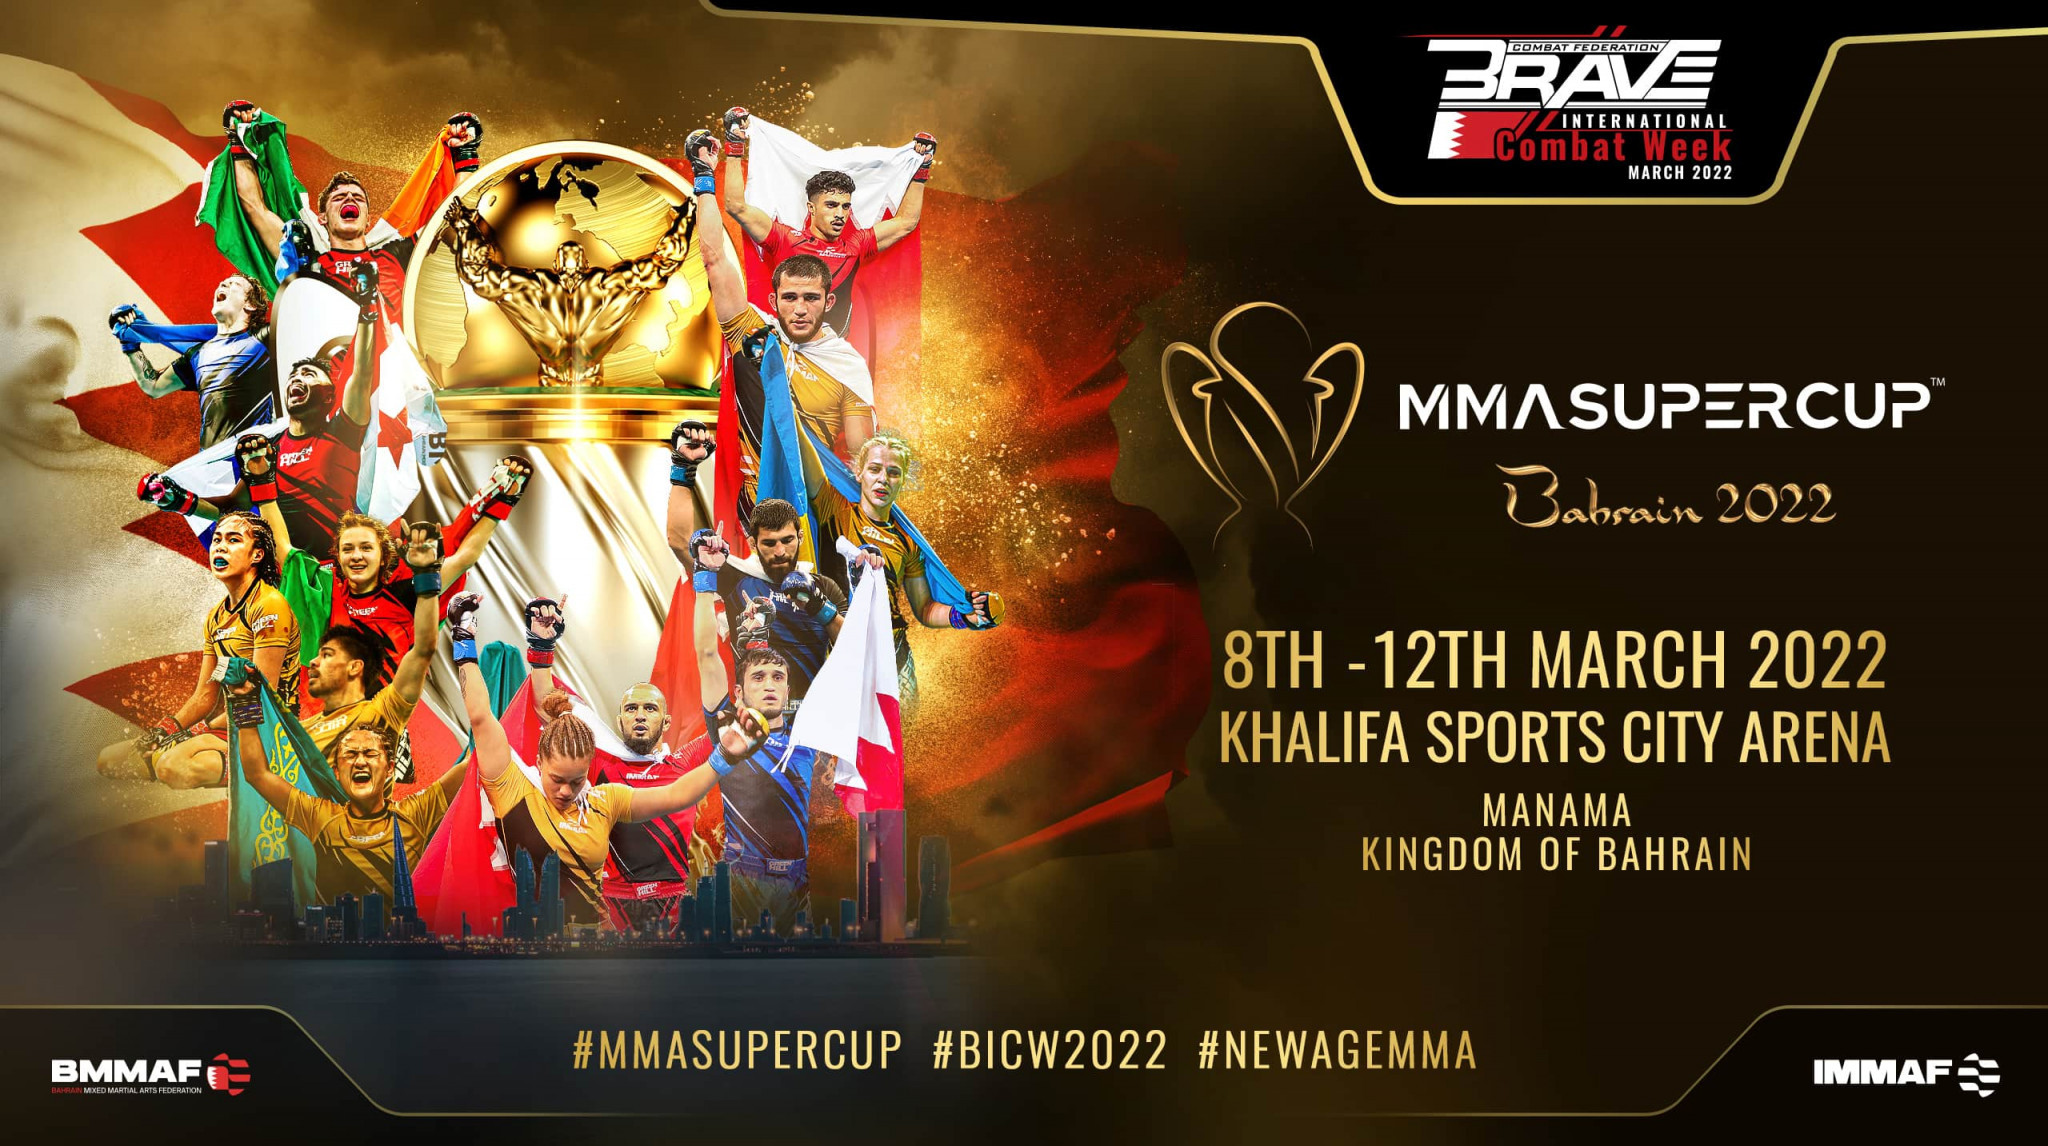 Ireland are set to feature at the MMA SuperCup in Bahrain ©IMMAF